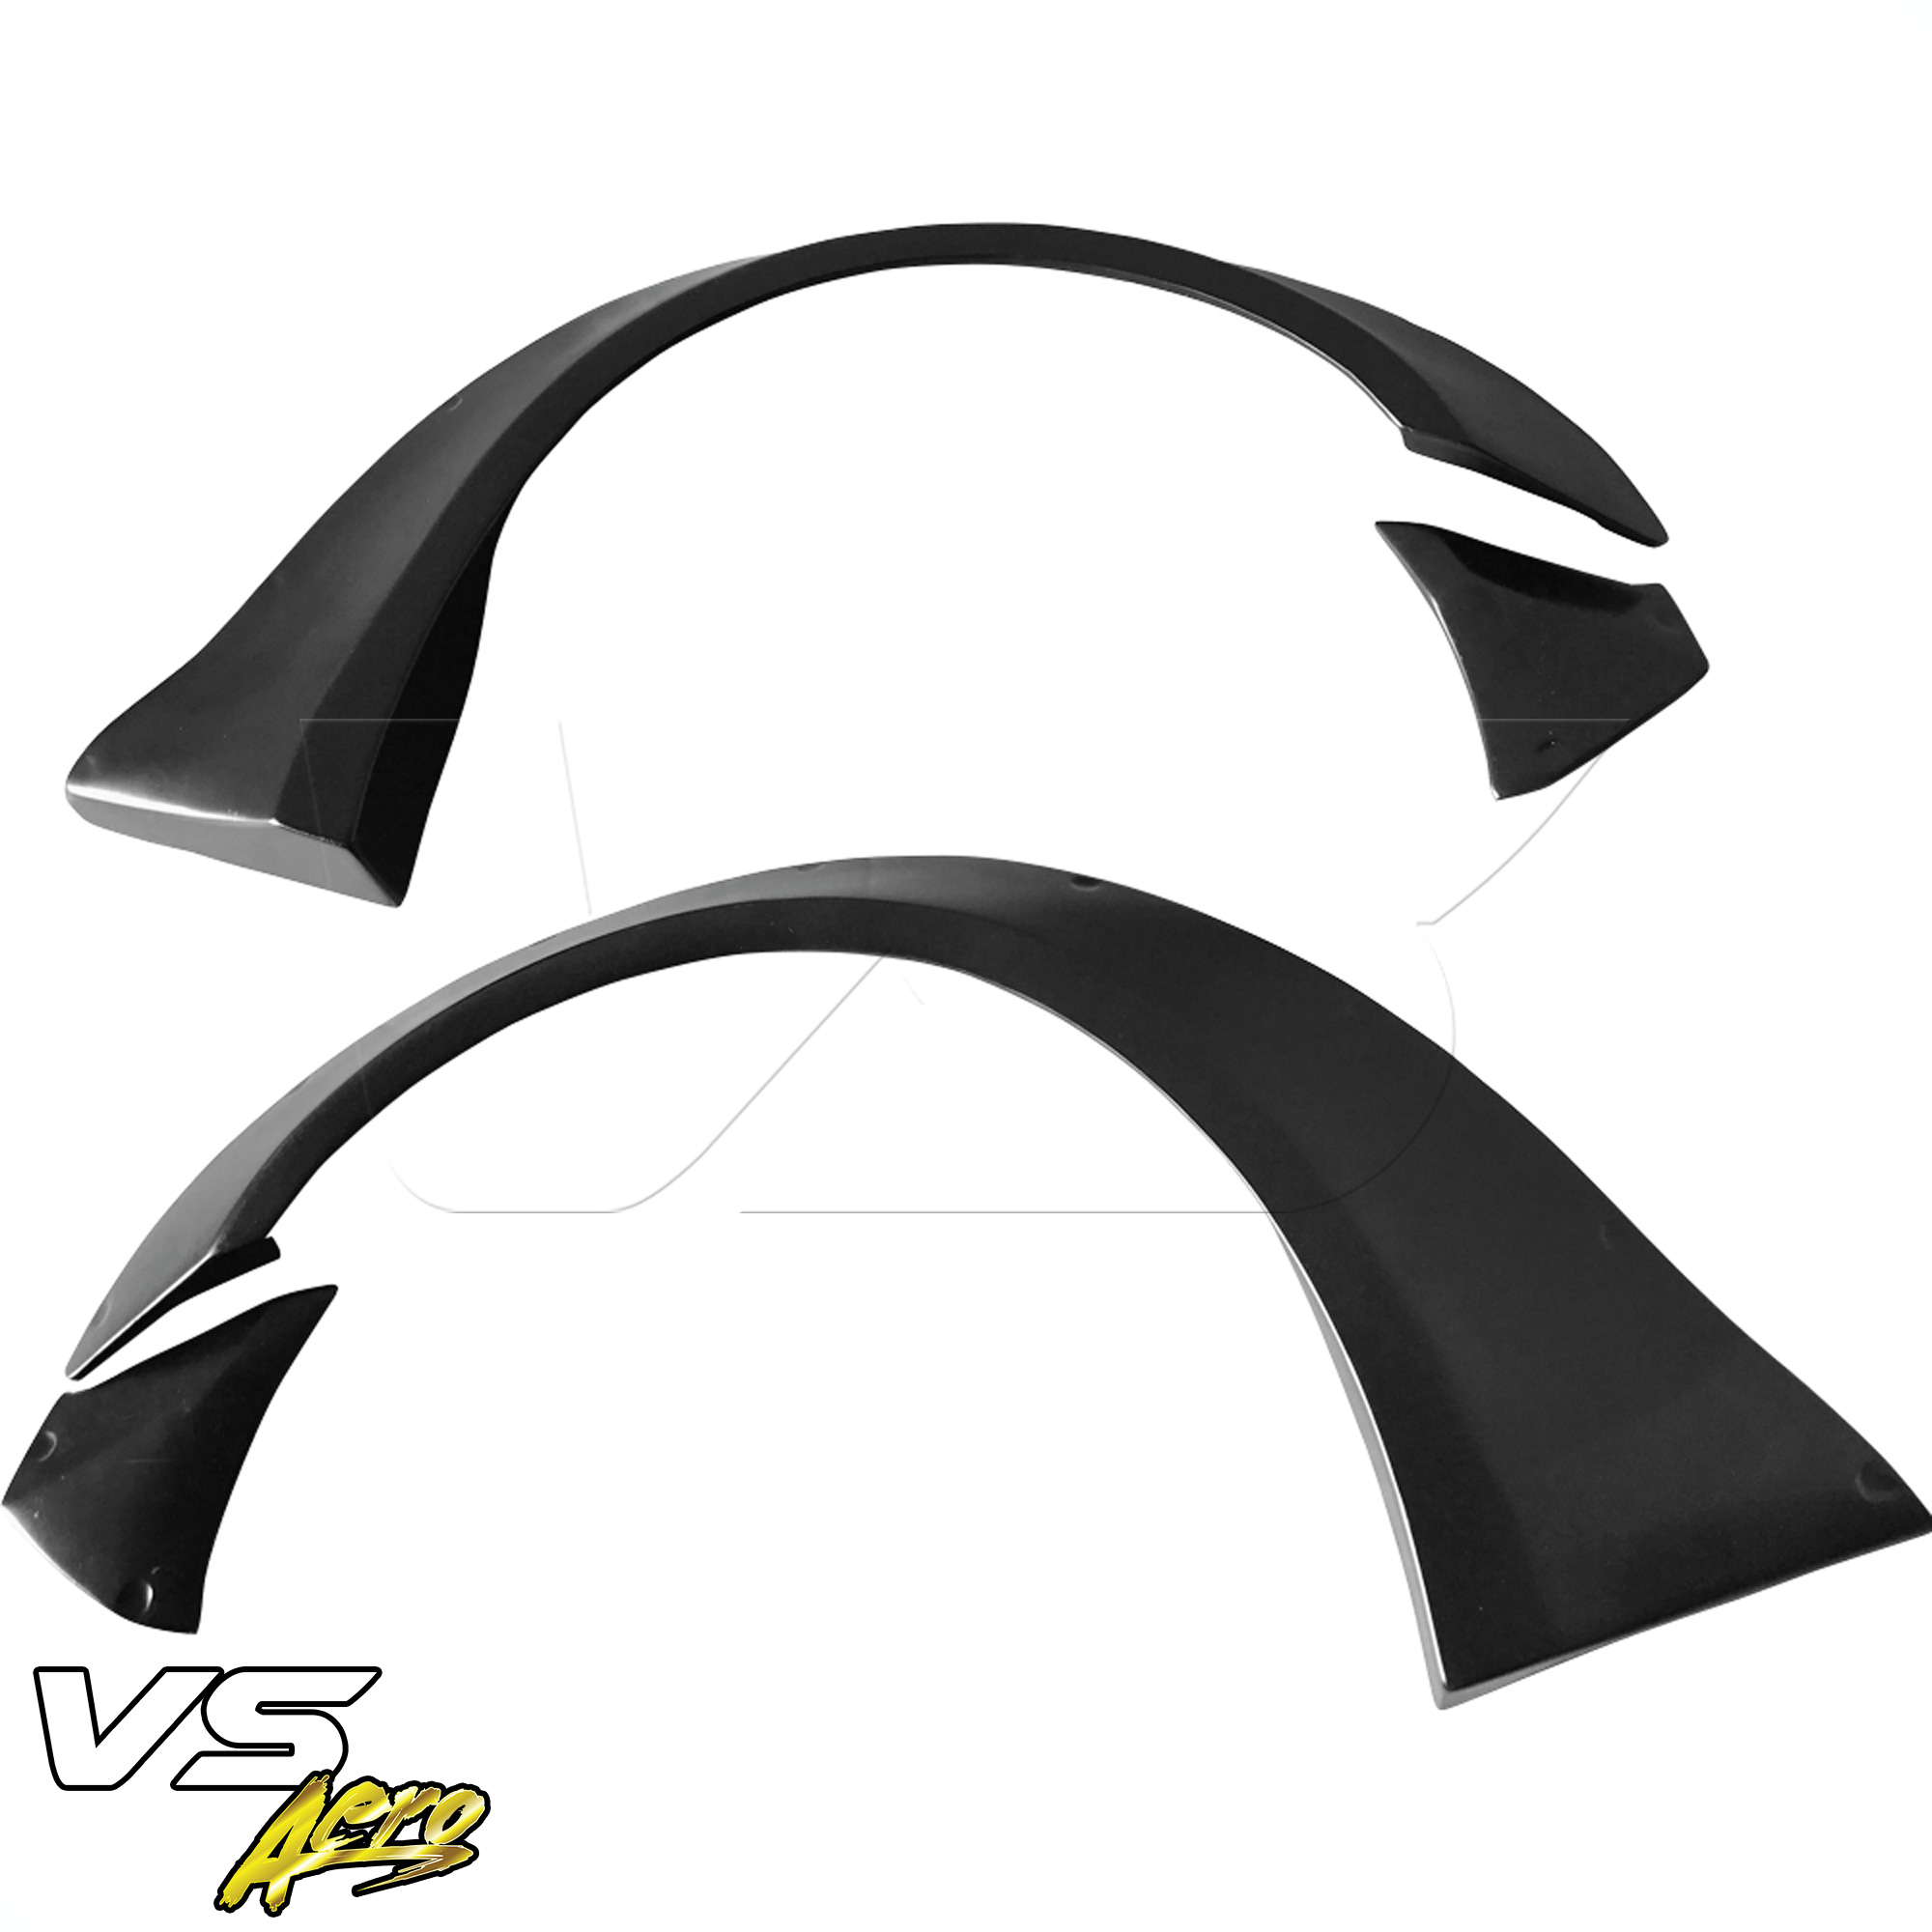 VSaero FRP LBPE Wide Body Fender Flares (front) 4pc > Infiniti G37 Coupe 2008-2015 > 2dr Coupe - Image 8